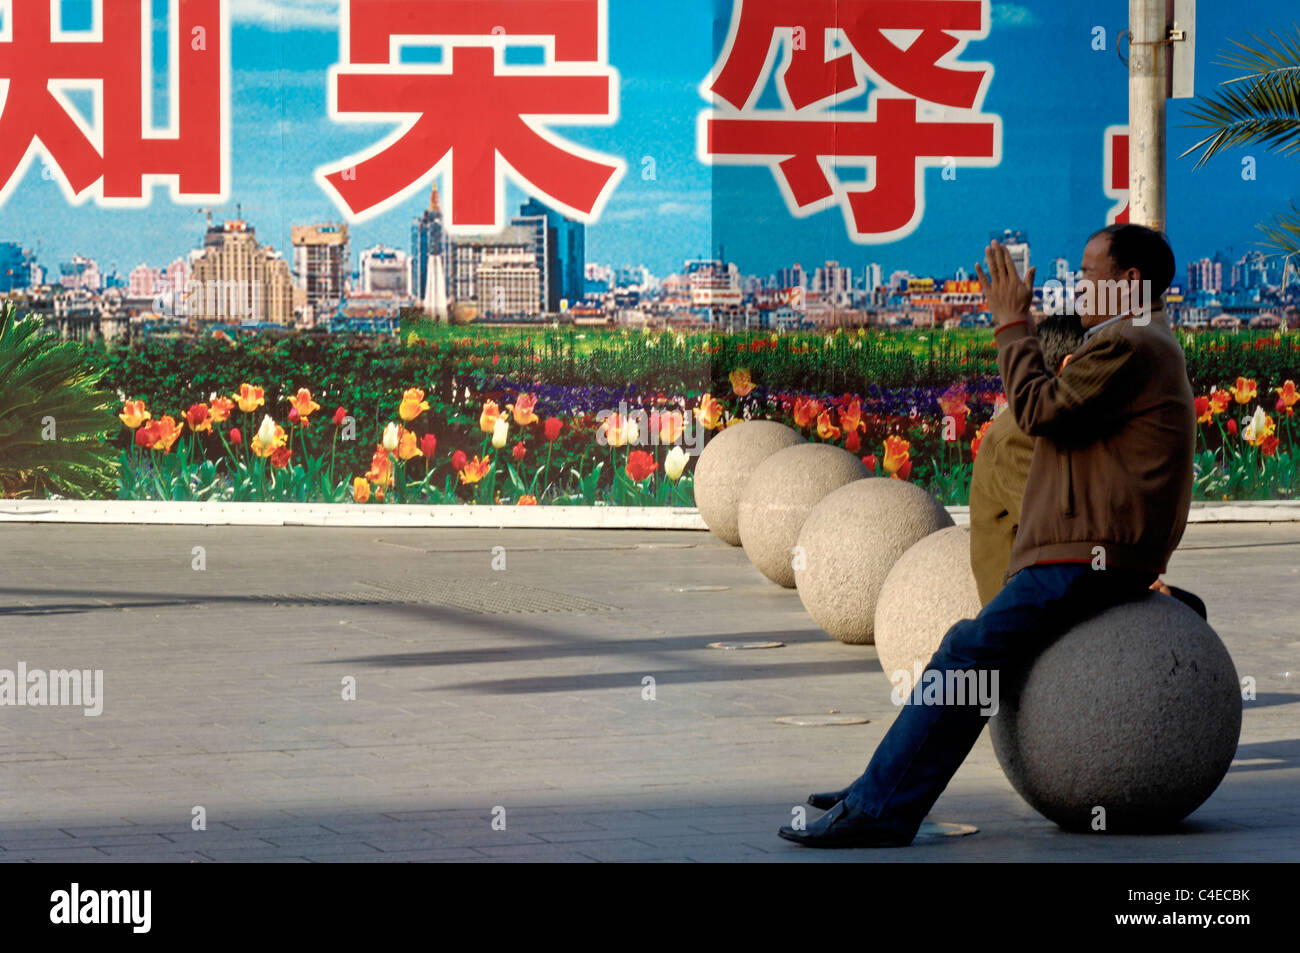 People walking in front of billboards erected around a building site, downtown Shanghai near the Bund, China. Stock Photo